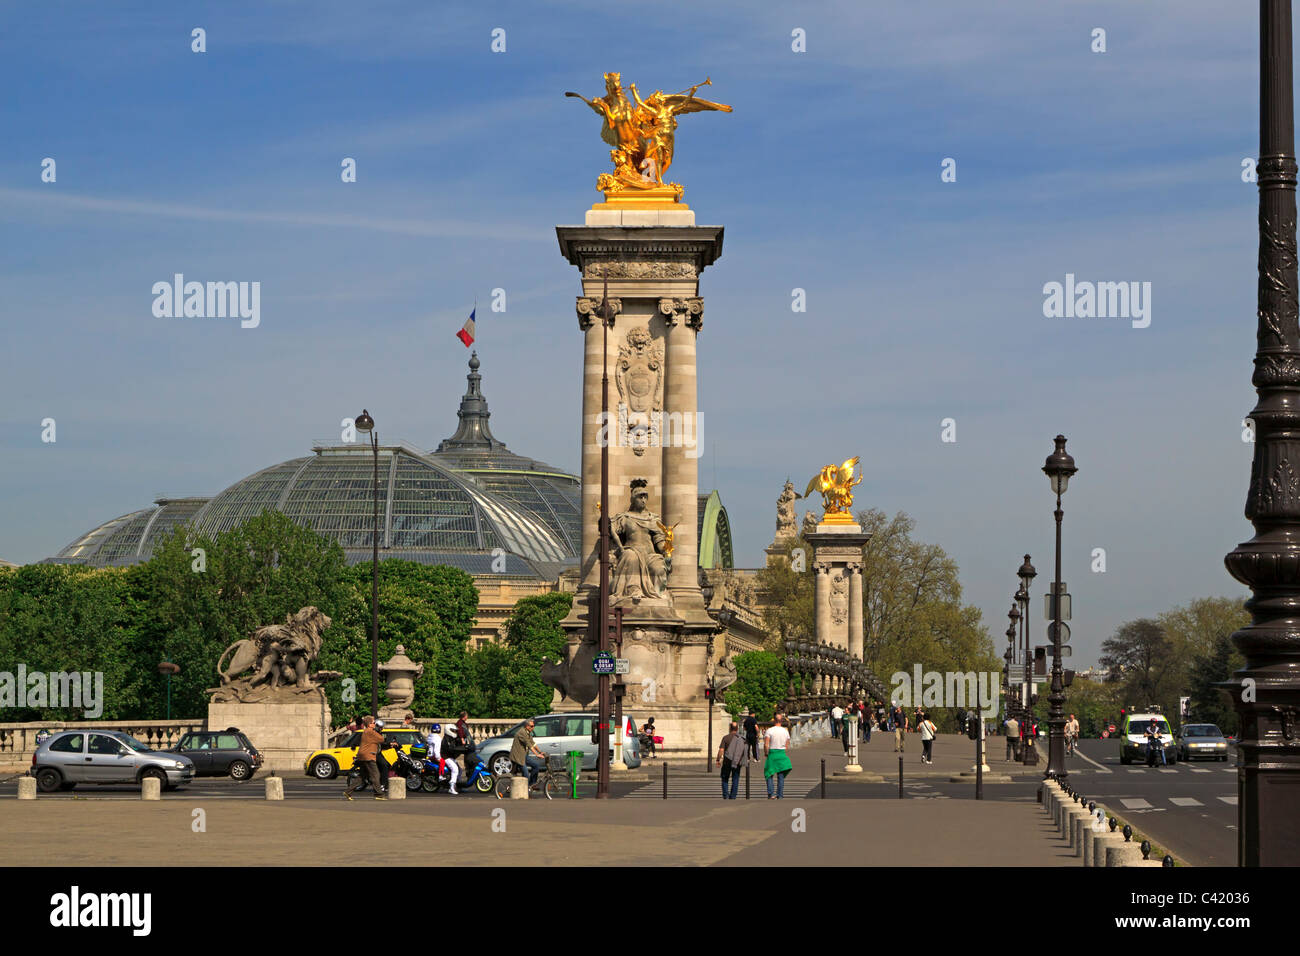 Pont Alexandre III, Paris, France from the Left Bank. The Grand Palais roof can be seen in the bankground. Stock Photo